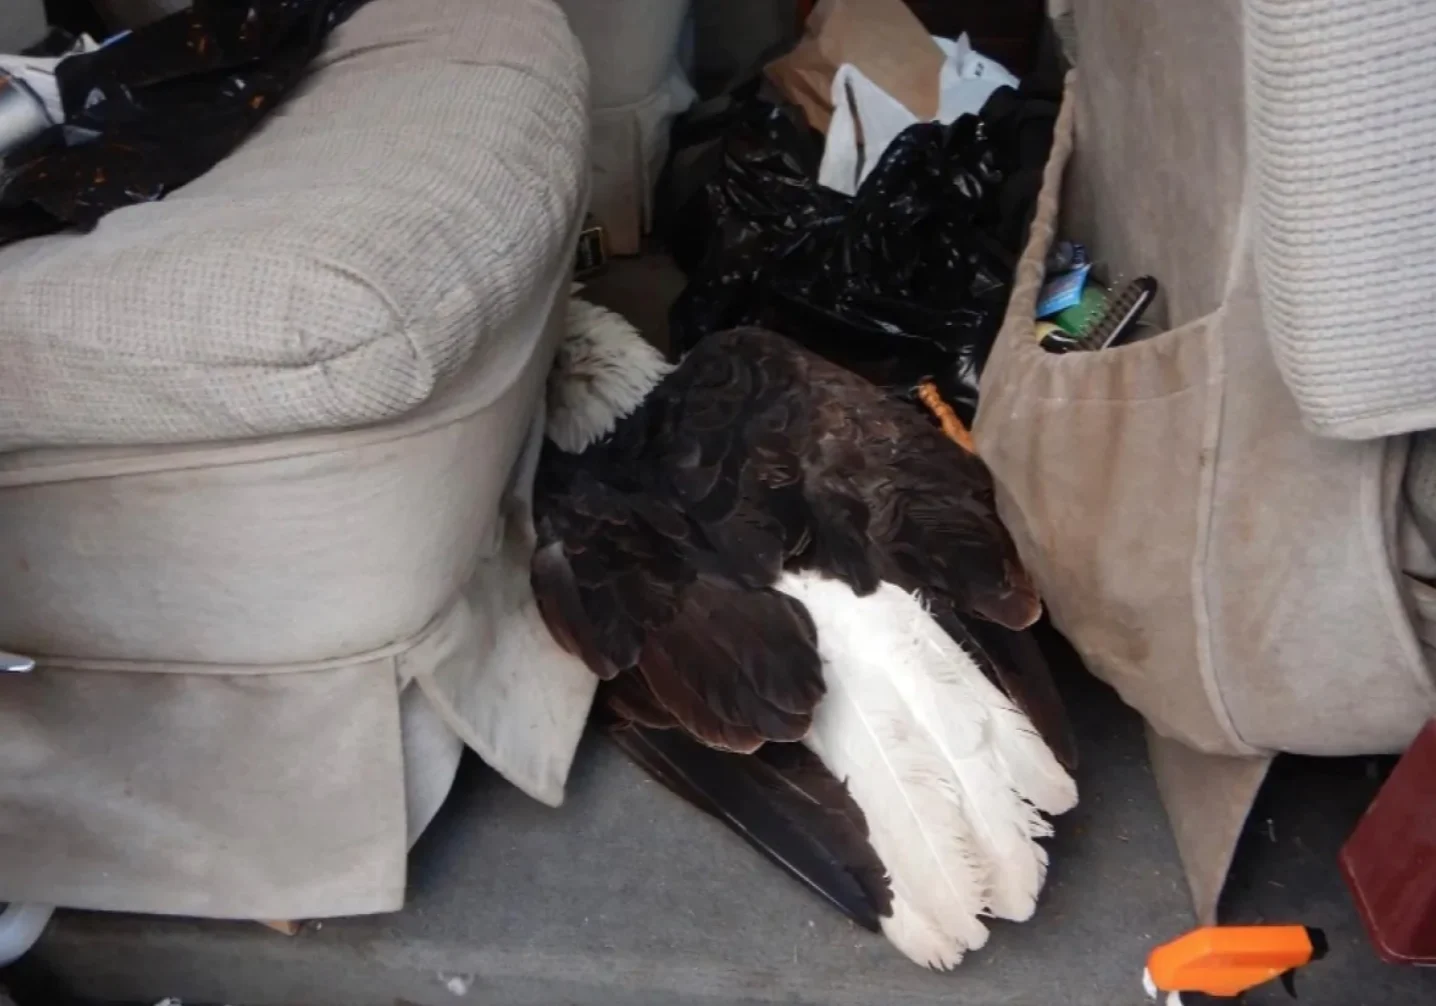 CBC: The full-size adult eagle, which was placed in the back seat of the van, suddenly woke up from what is presumed to be a concussion-induced sleep while the driver was driving.   (RCMP )